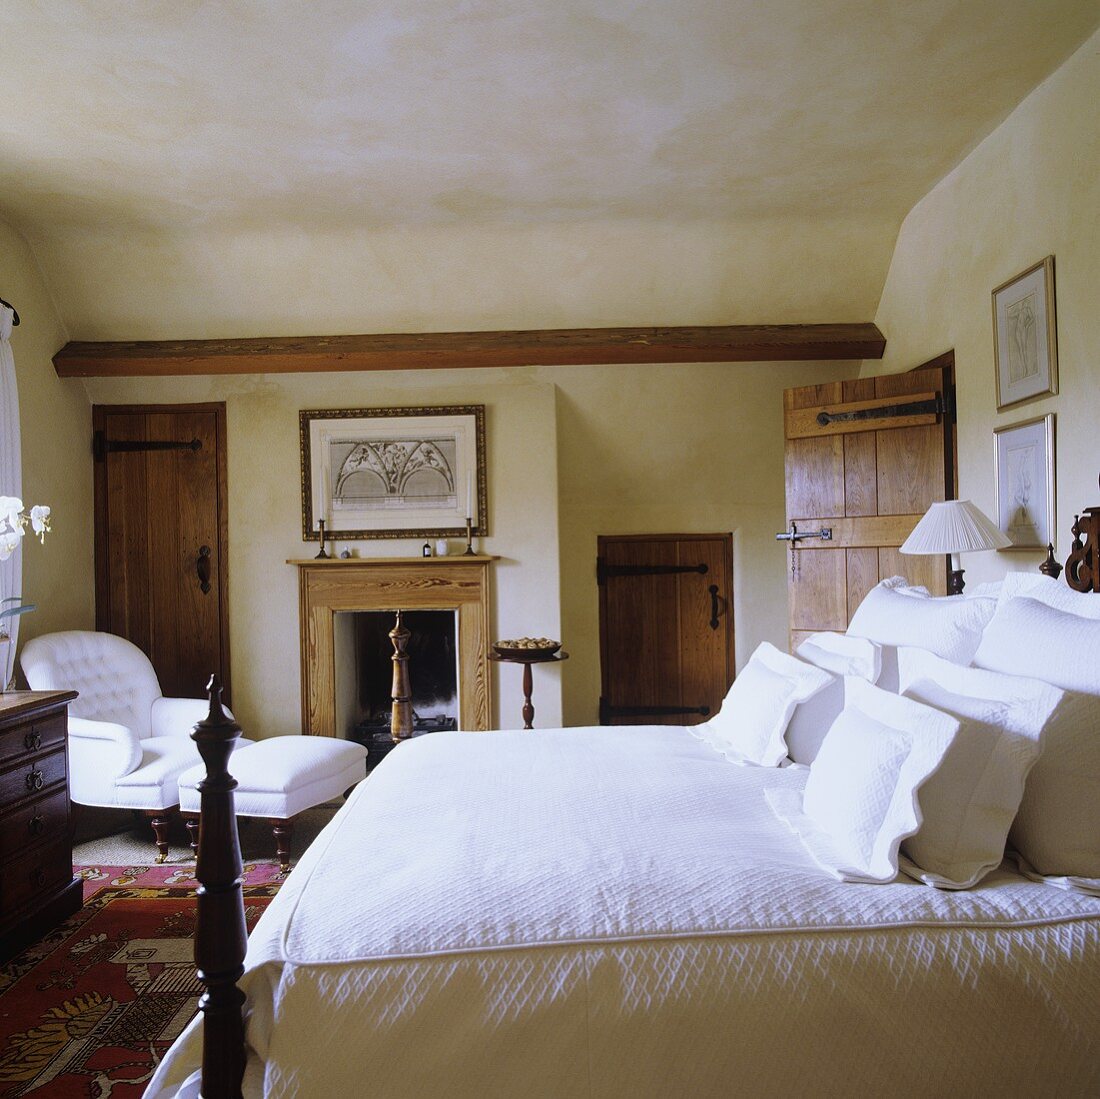 A double bed with white cushions in a country-style bedroom